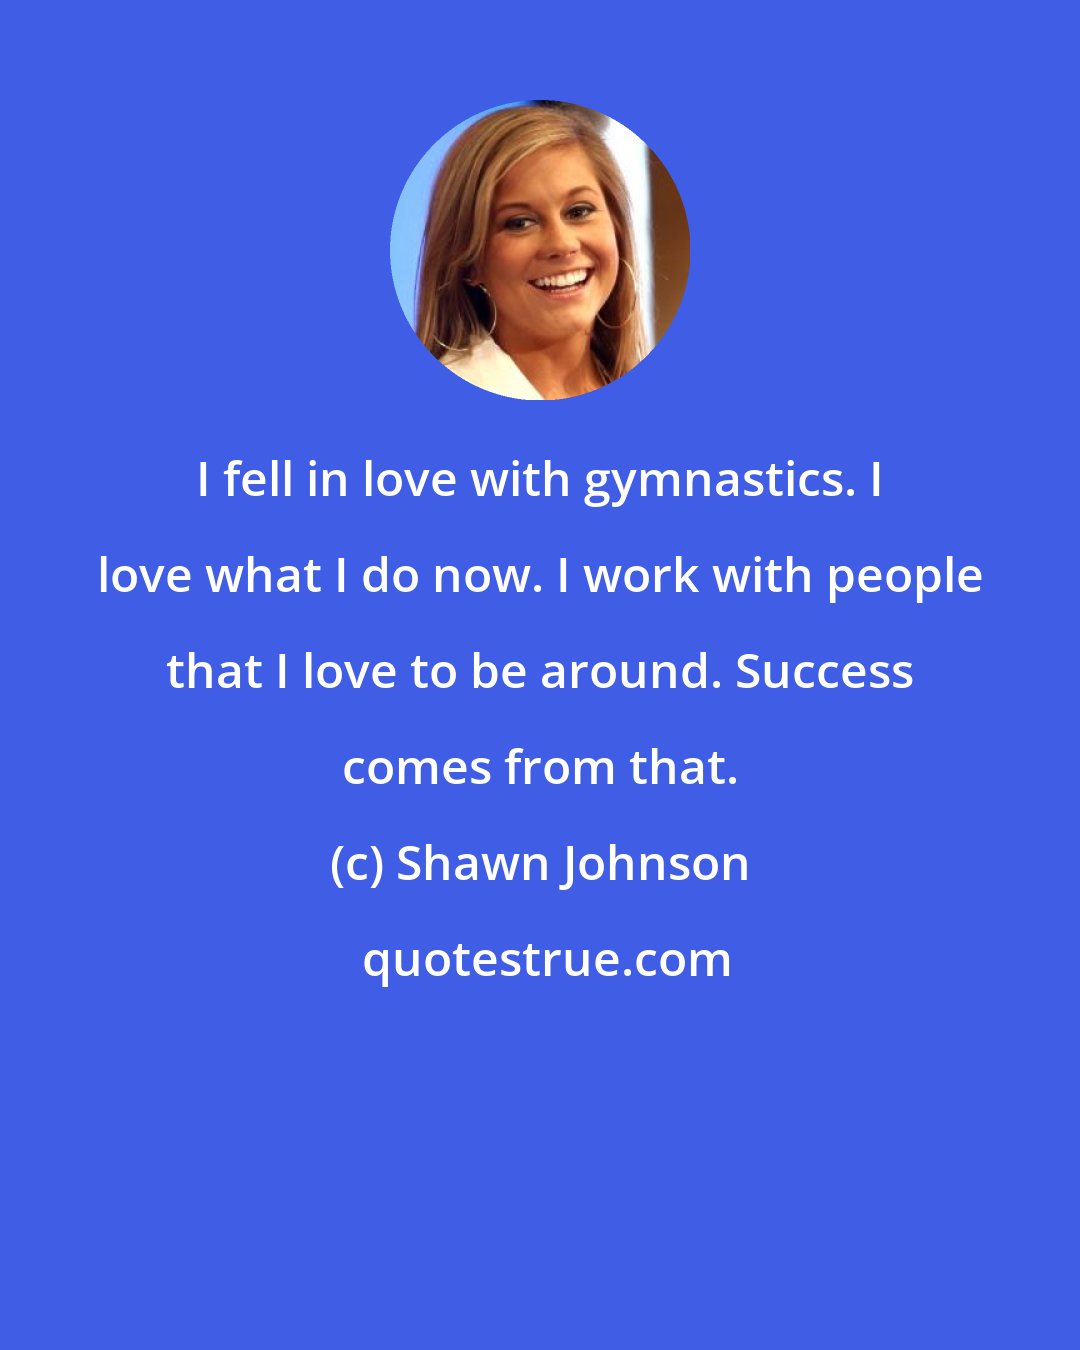 Shawn Johnson: I fell in love with gymnastics. I love what I do now. I work with people that I love to be around. Success comes from that.